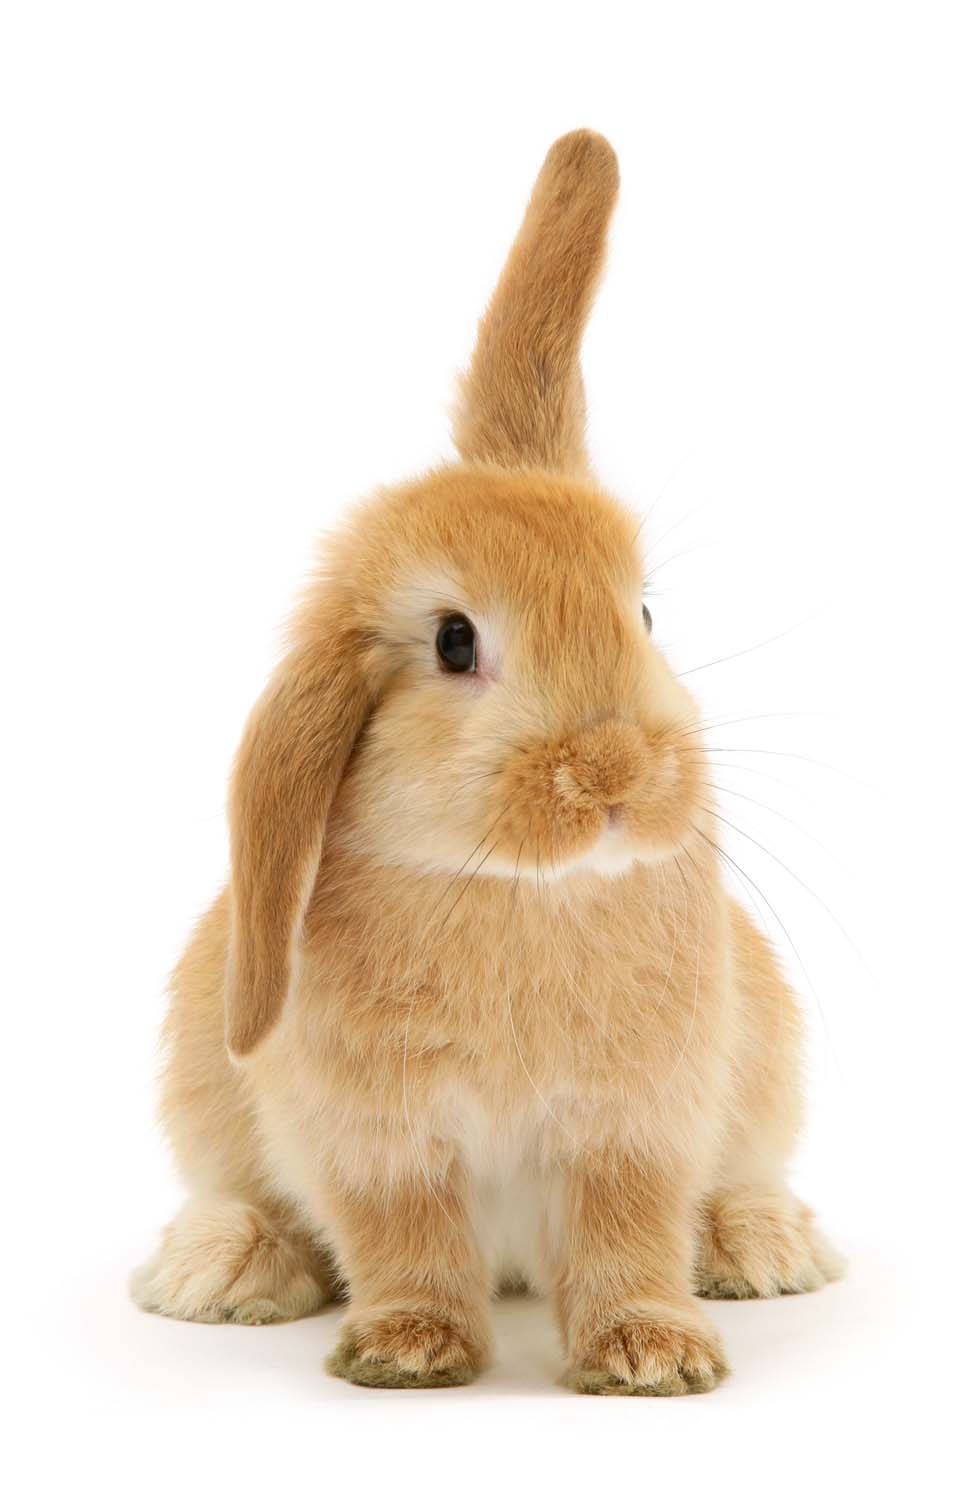 Rabbit with one ear up